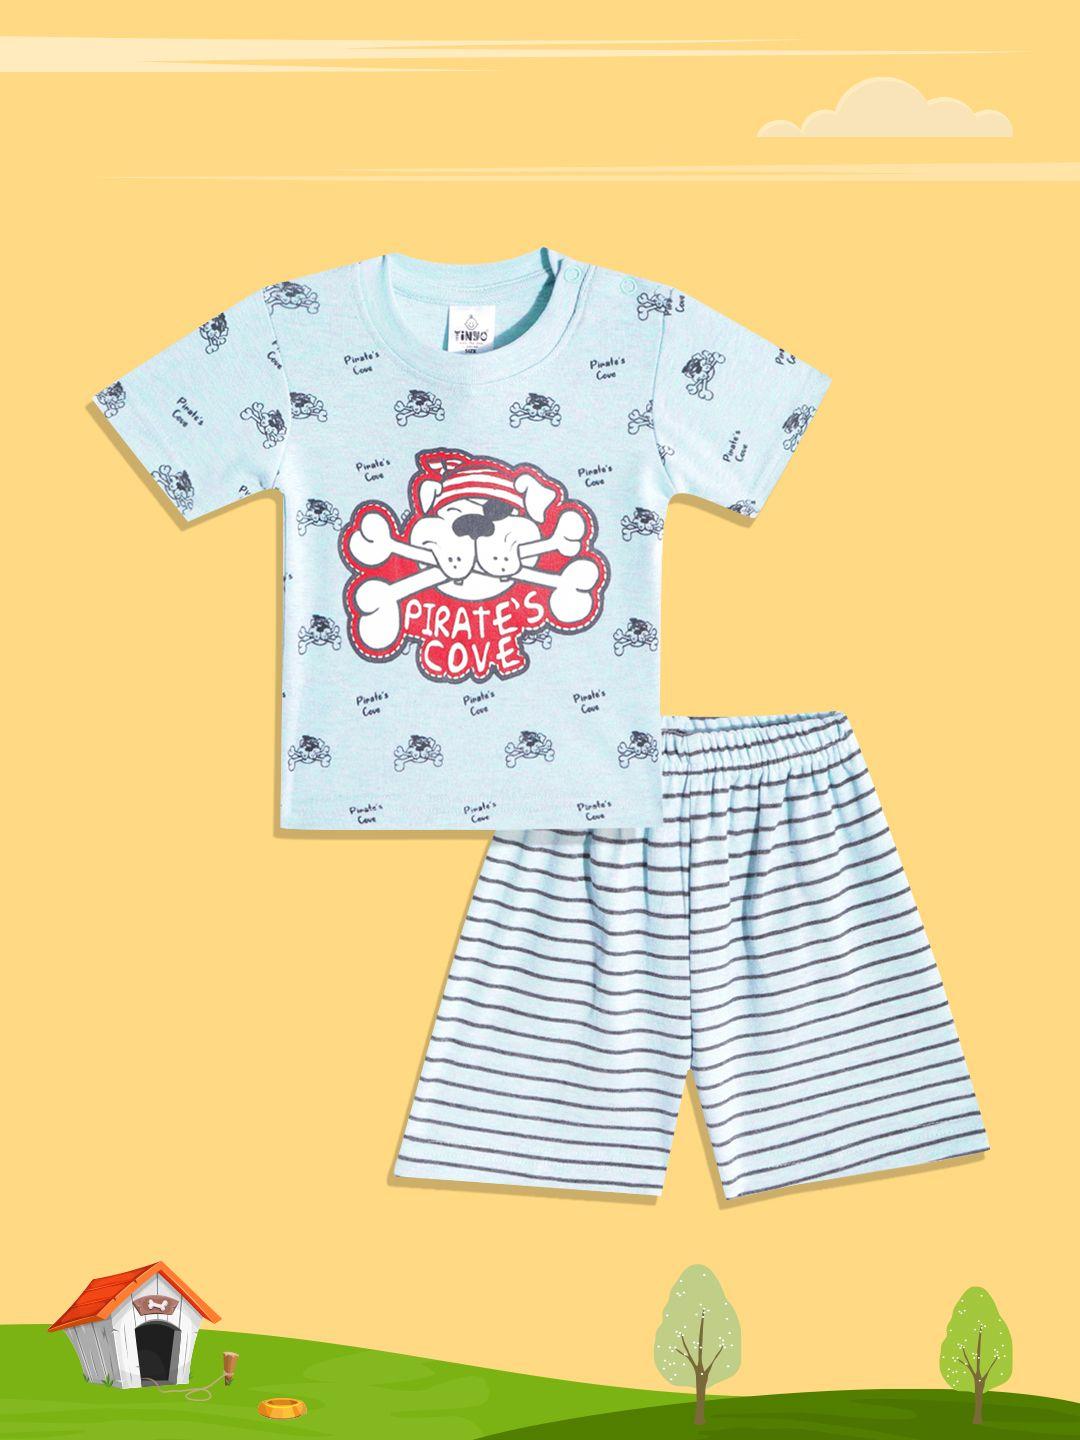 tinyo infant boys blue & red pirate's cove print cotton clothing set